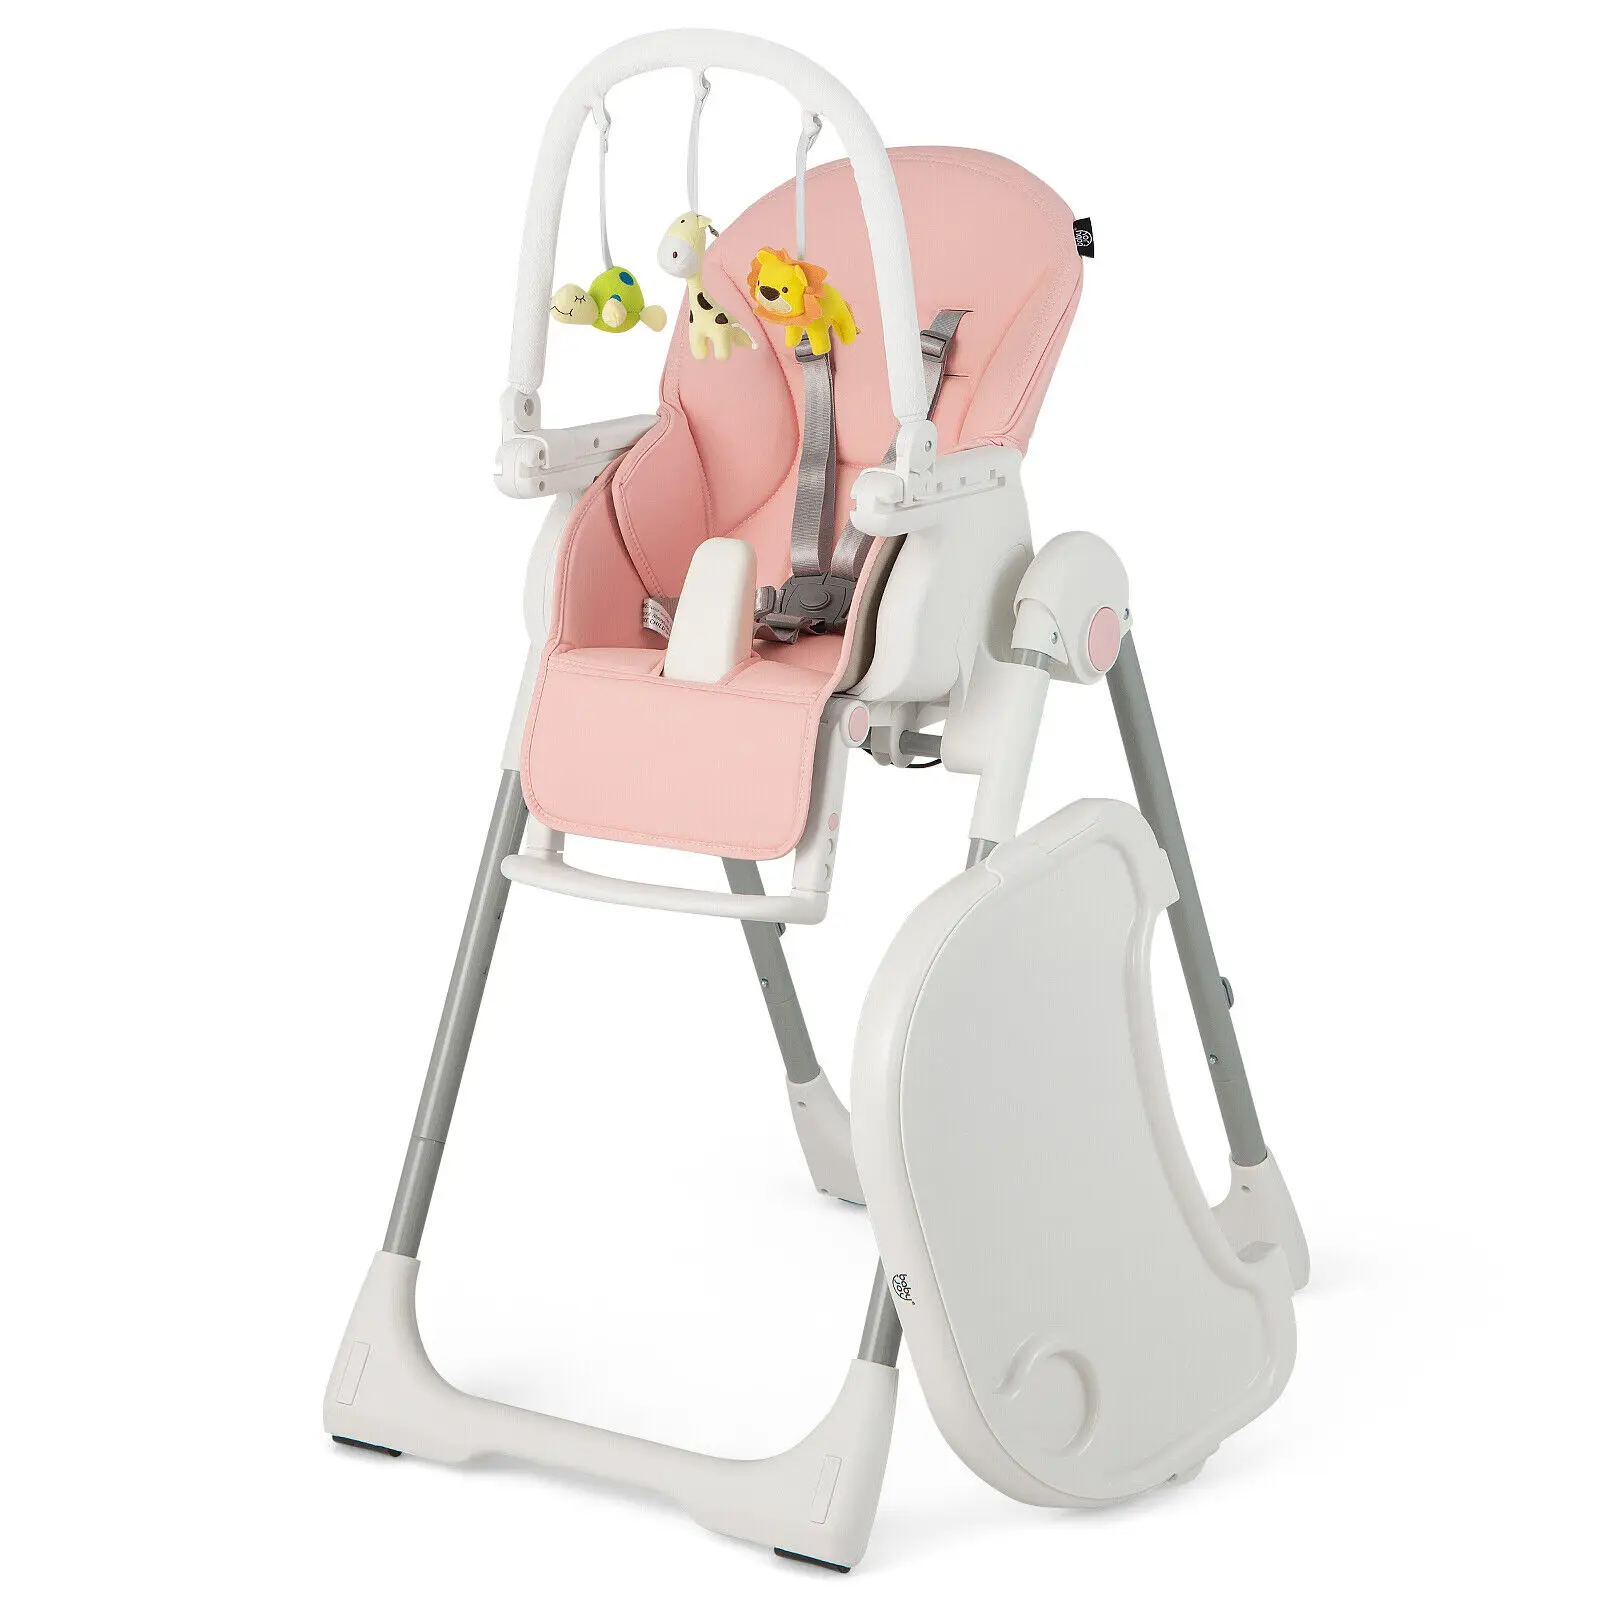 Babyjoy Foldable Baby High Chair w/ 7 Adjustable Heights & Free Toys Bar for Fun Pink